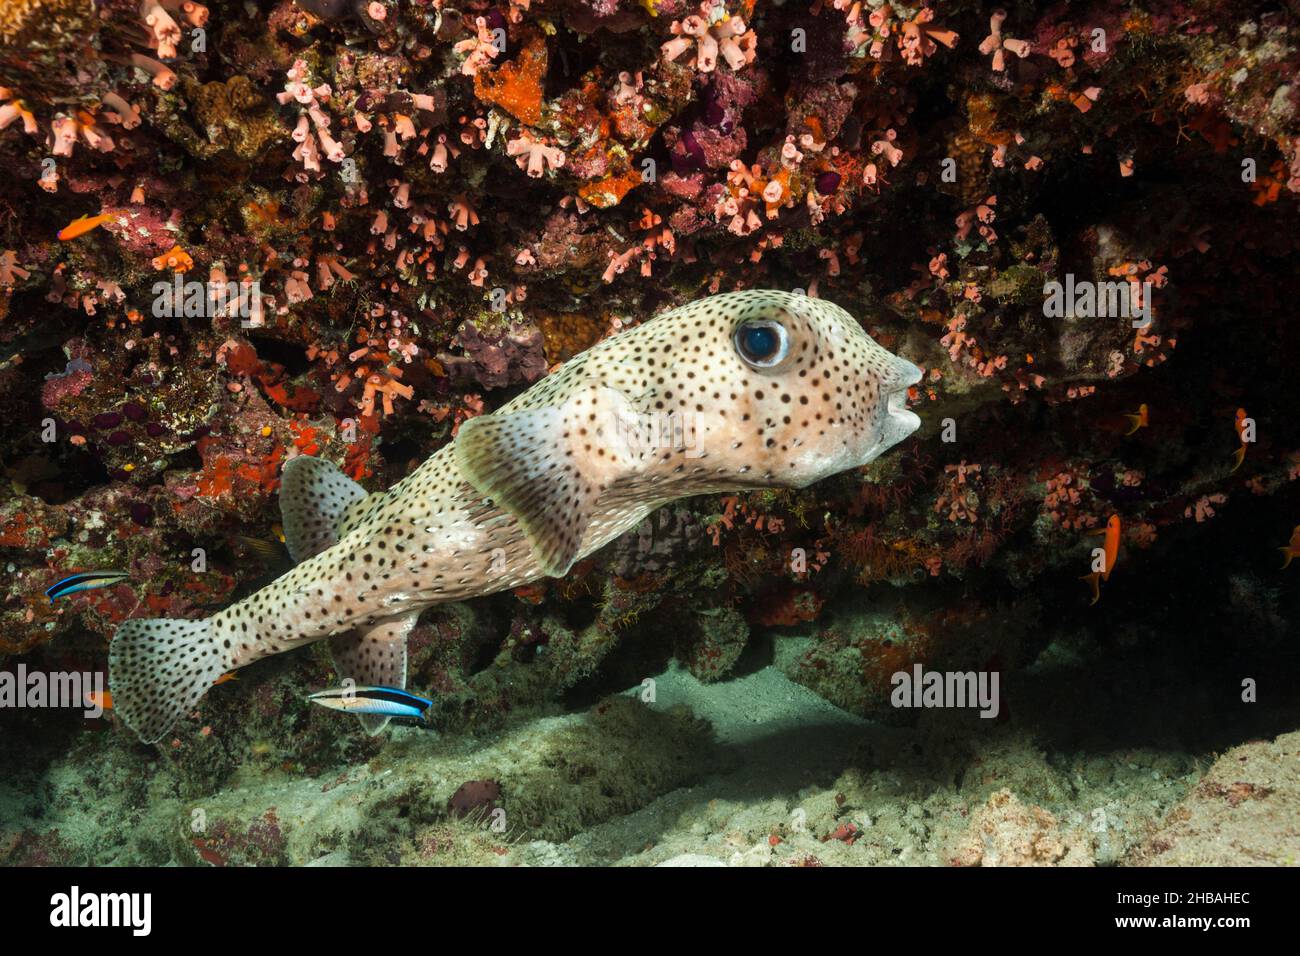 Porcupinefish cleaned by cleander fish, Diodon hystrix, North Male Atoll, Indian Ocean, Maldives Stock Photo